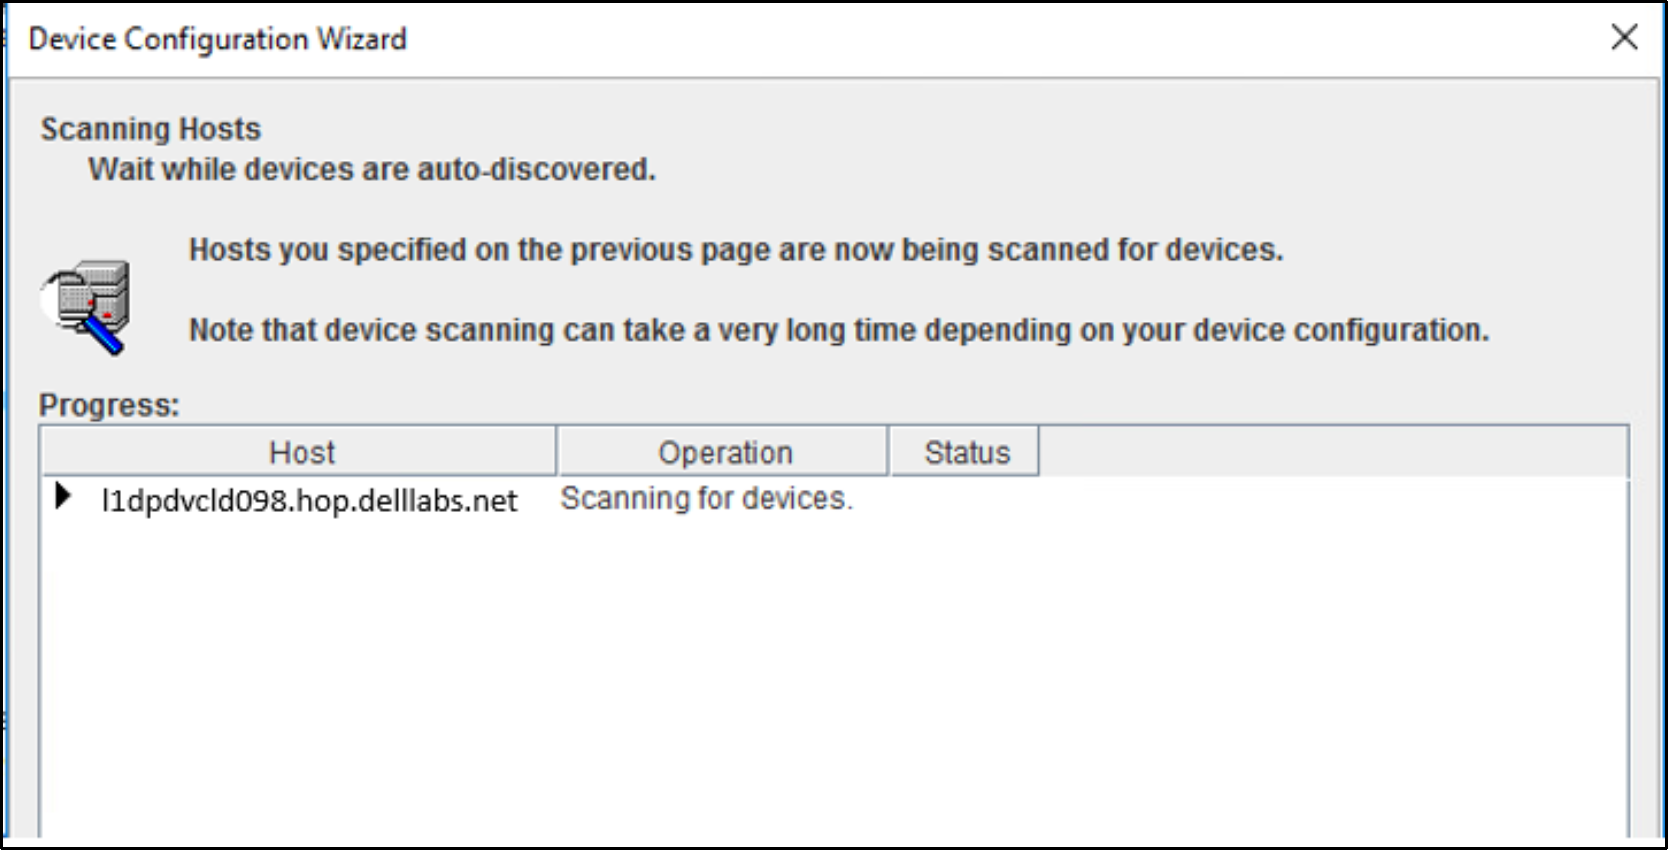 The image shows the device configuration wizard